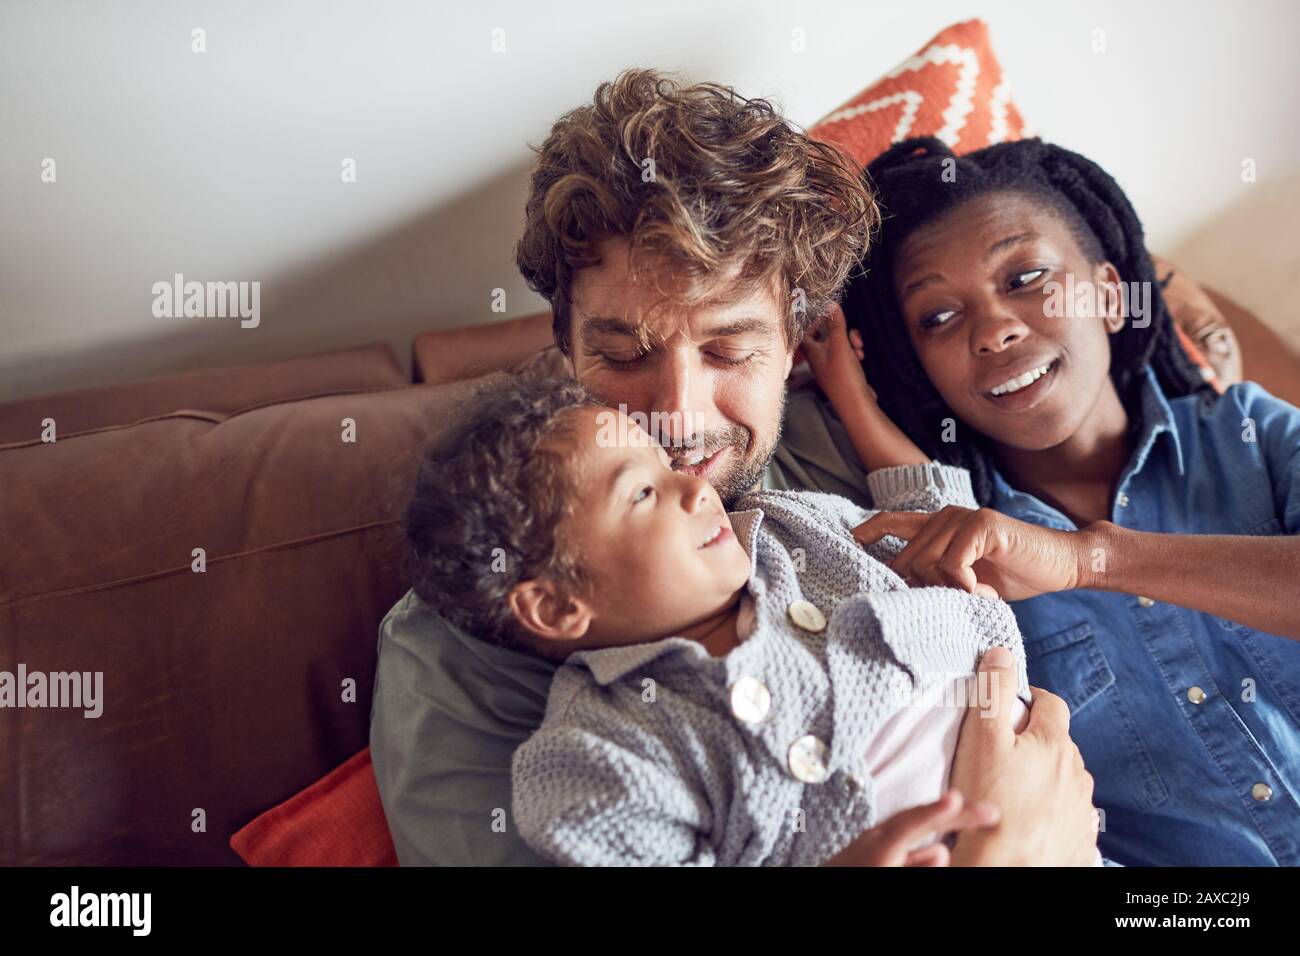 Affectionate young family cuddling on sofa Stock Photo